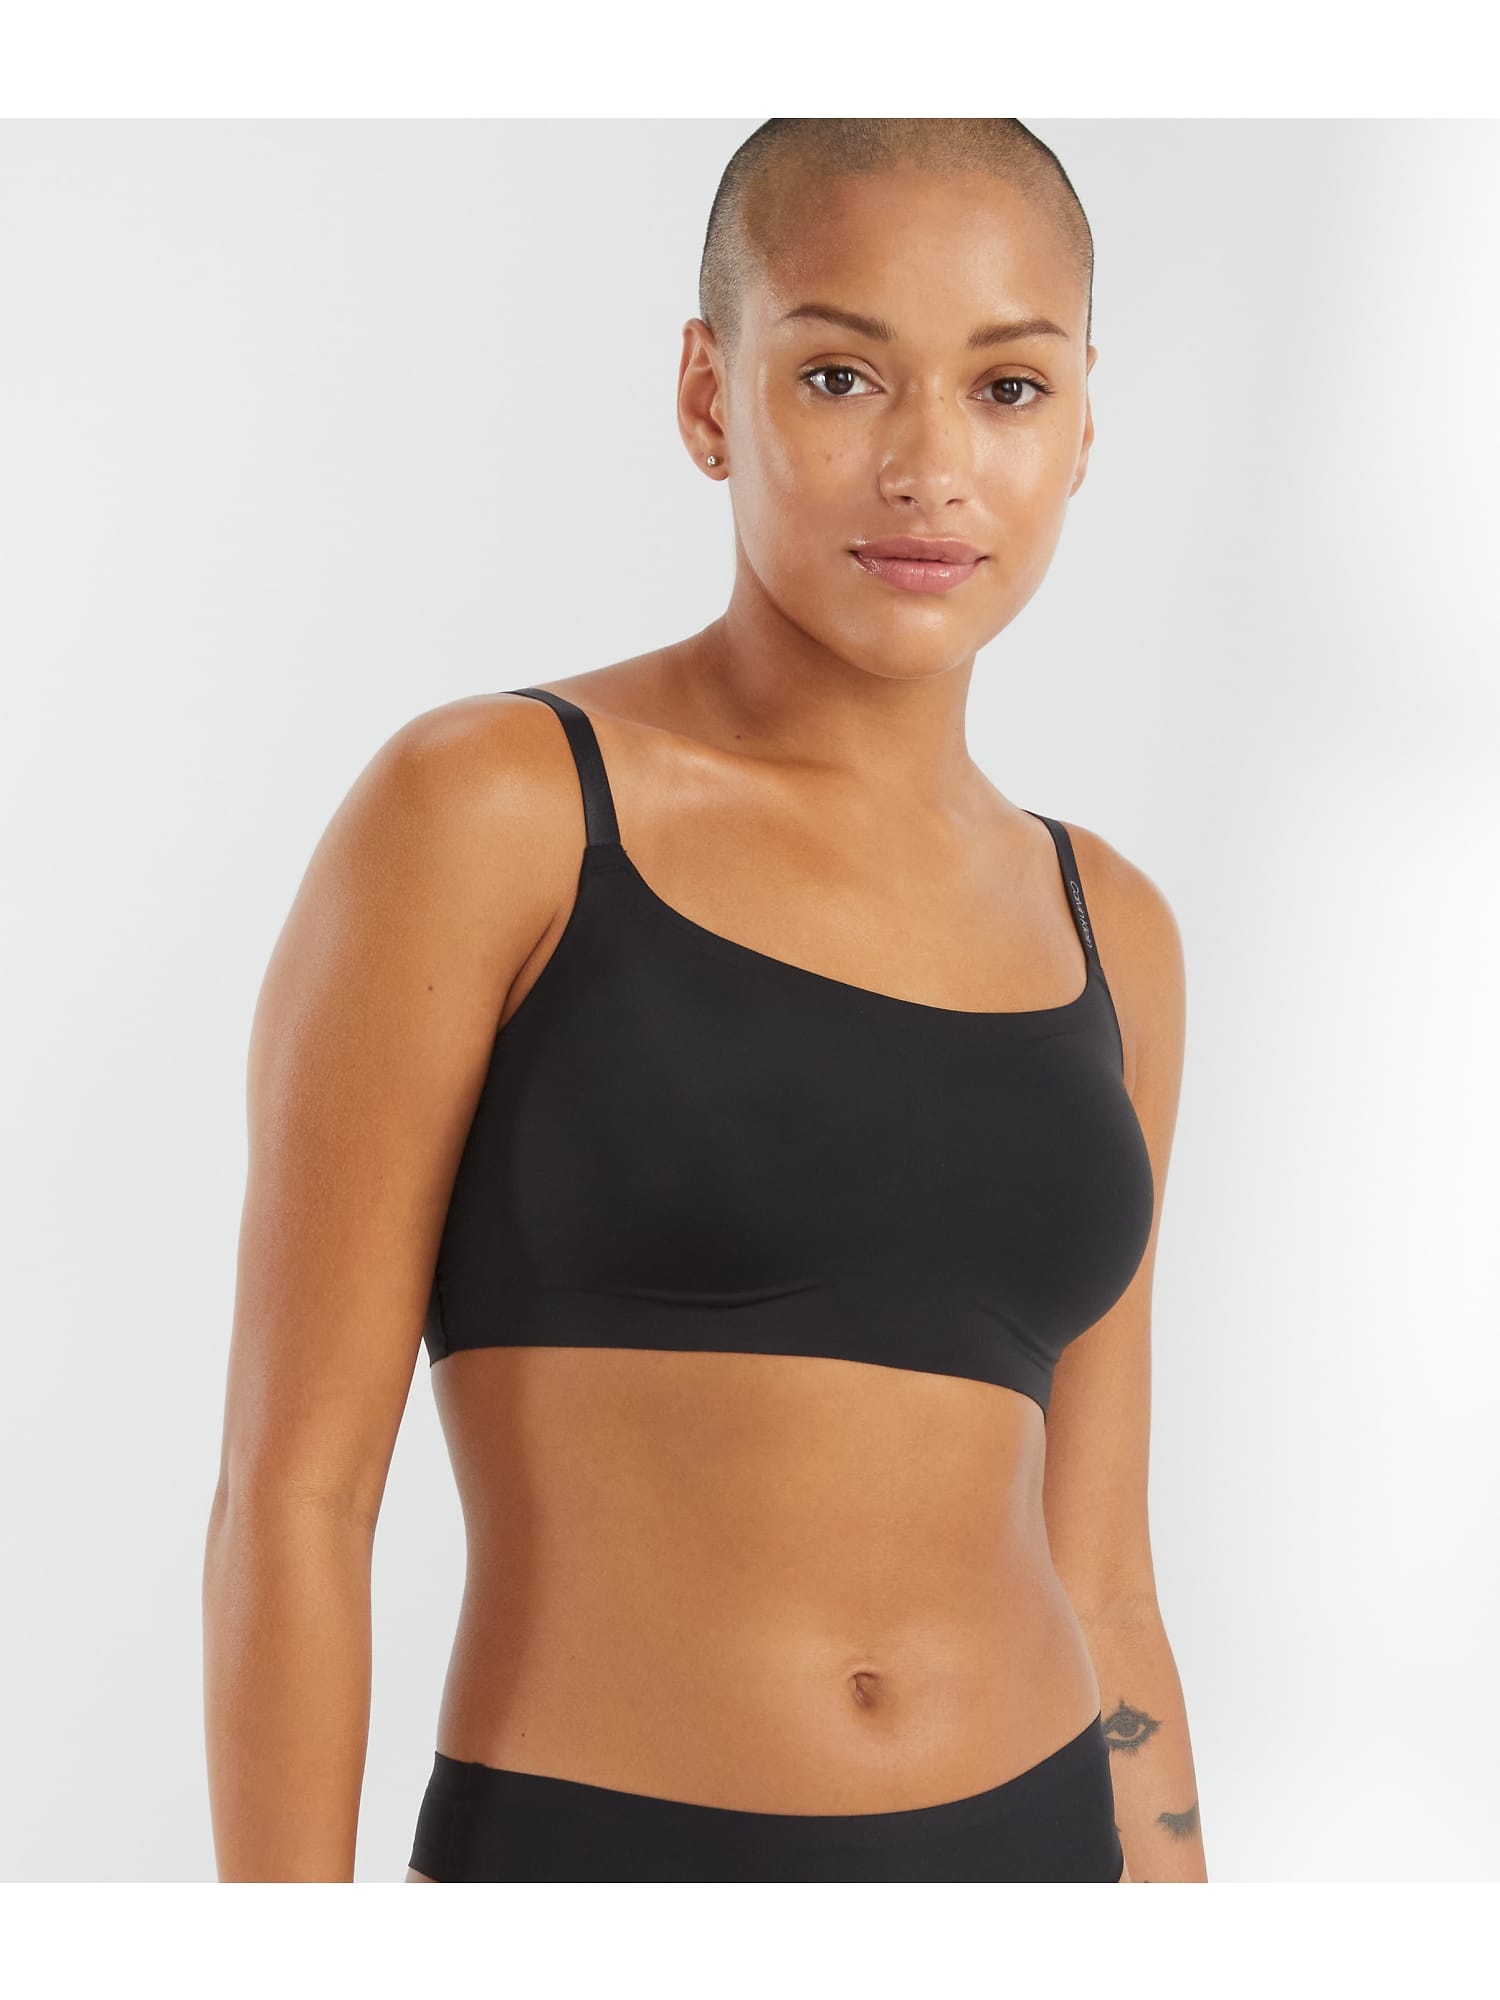 Calvin Klein Invisibles Comfort Lightly Lined Retro Bralette Black Qf4783  XL for sale online